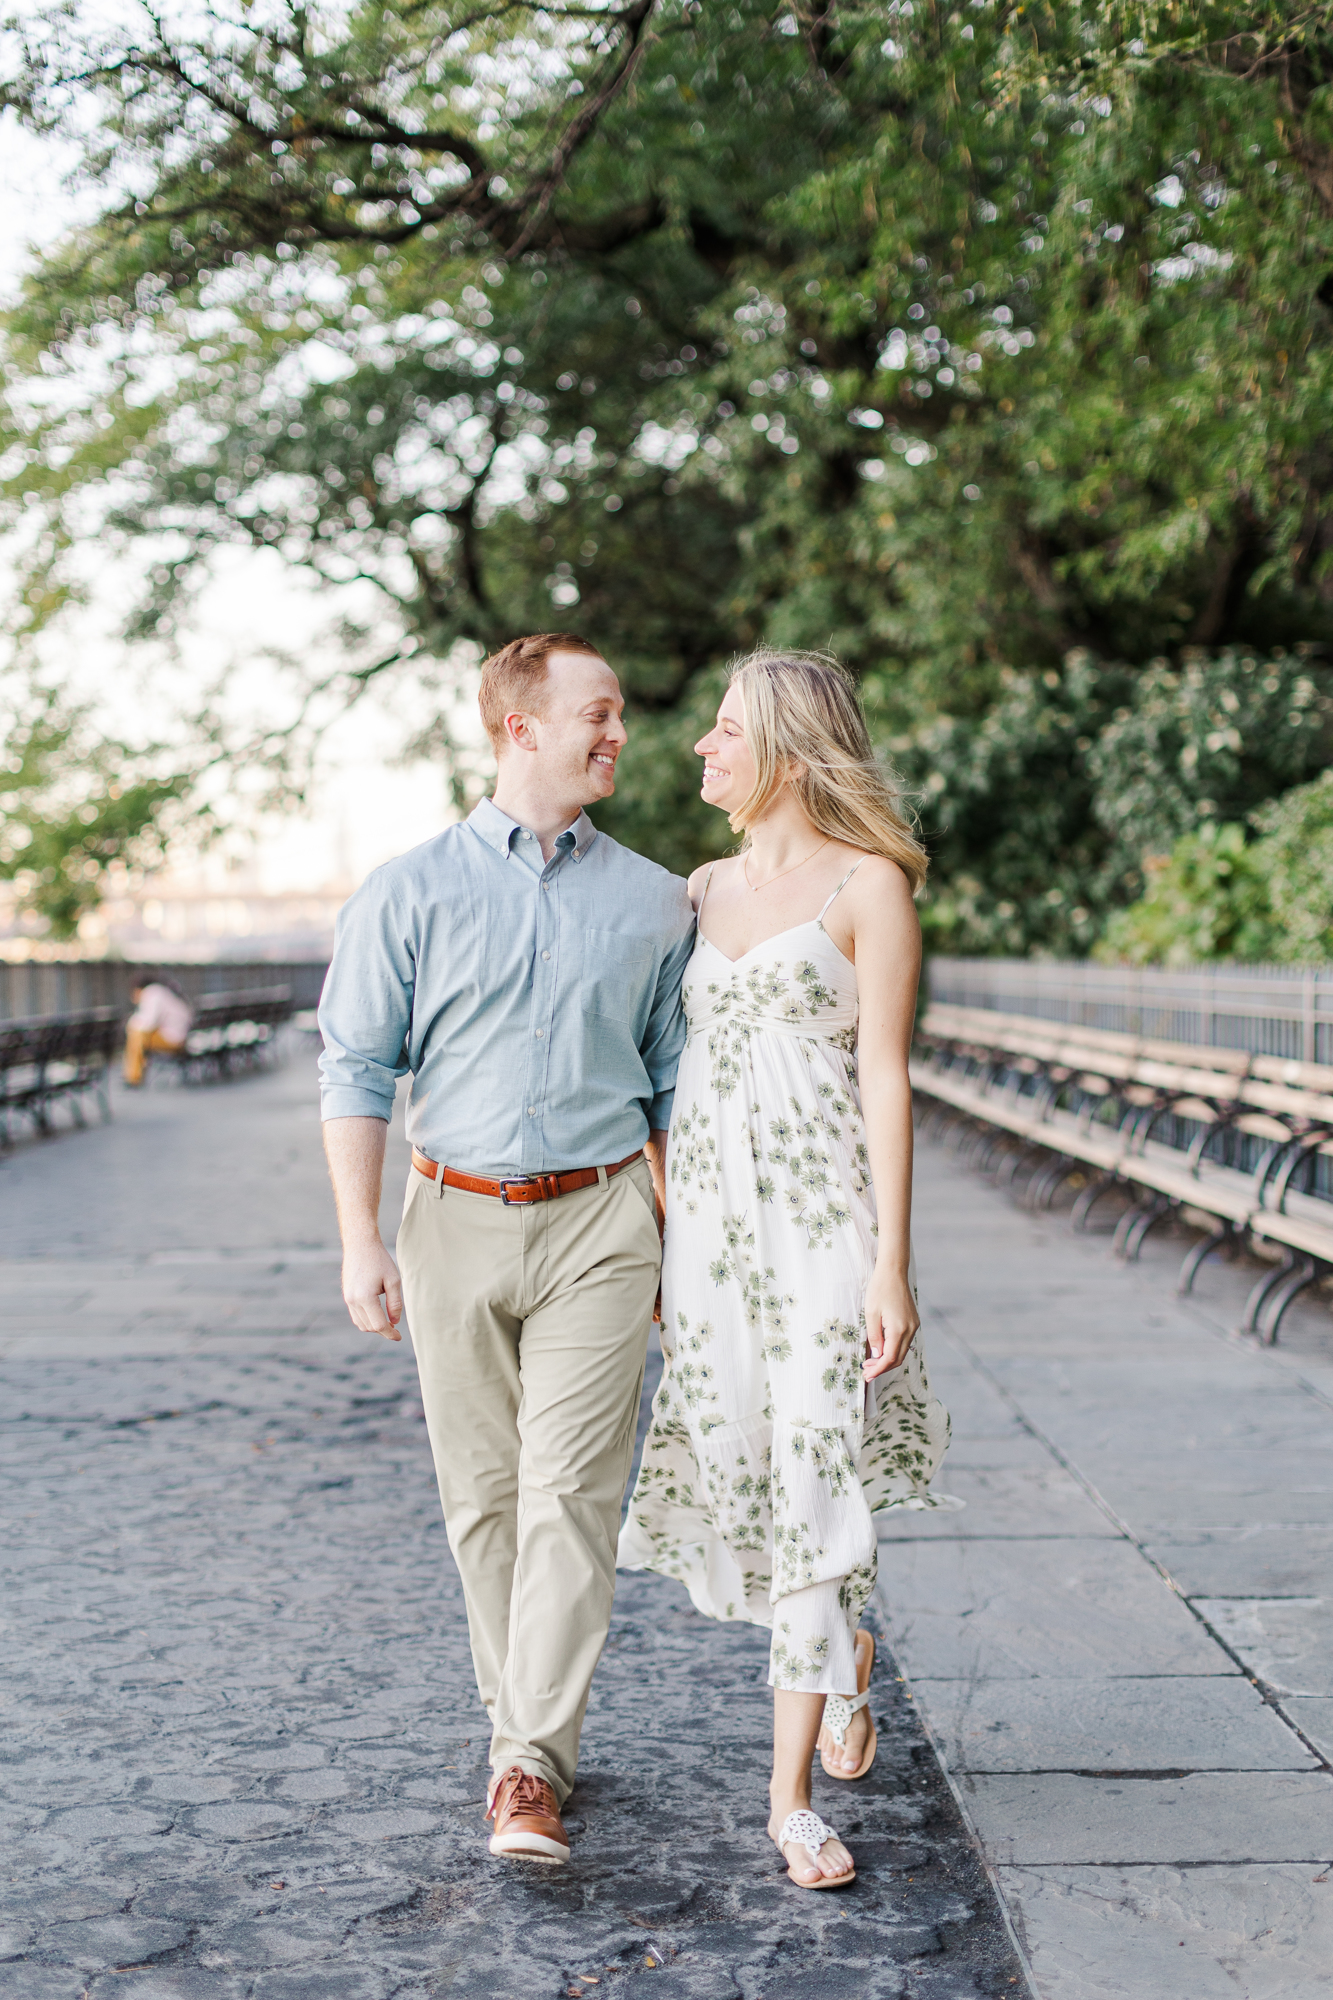 Amazing Engagement Photos In Brooklyn Heights